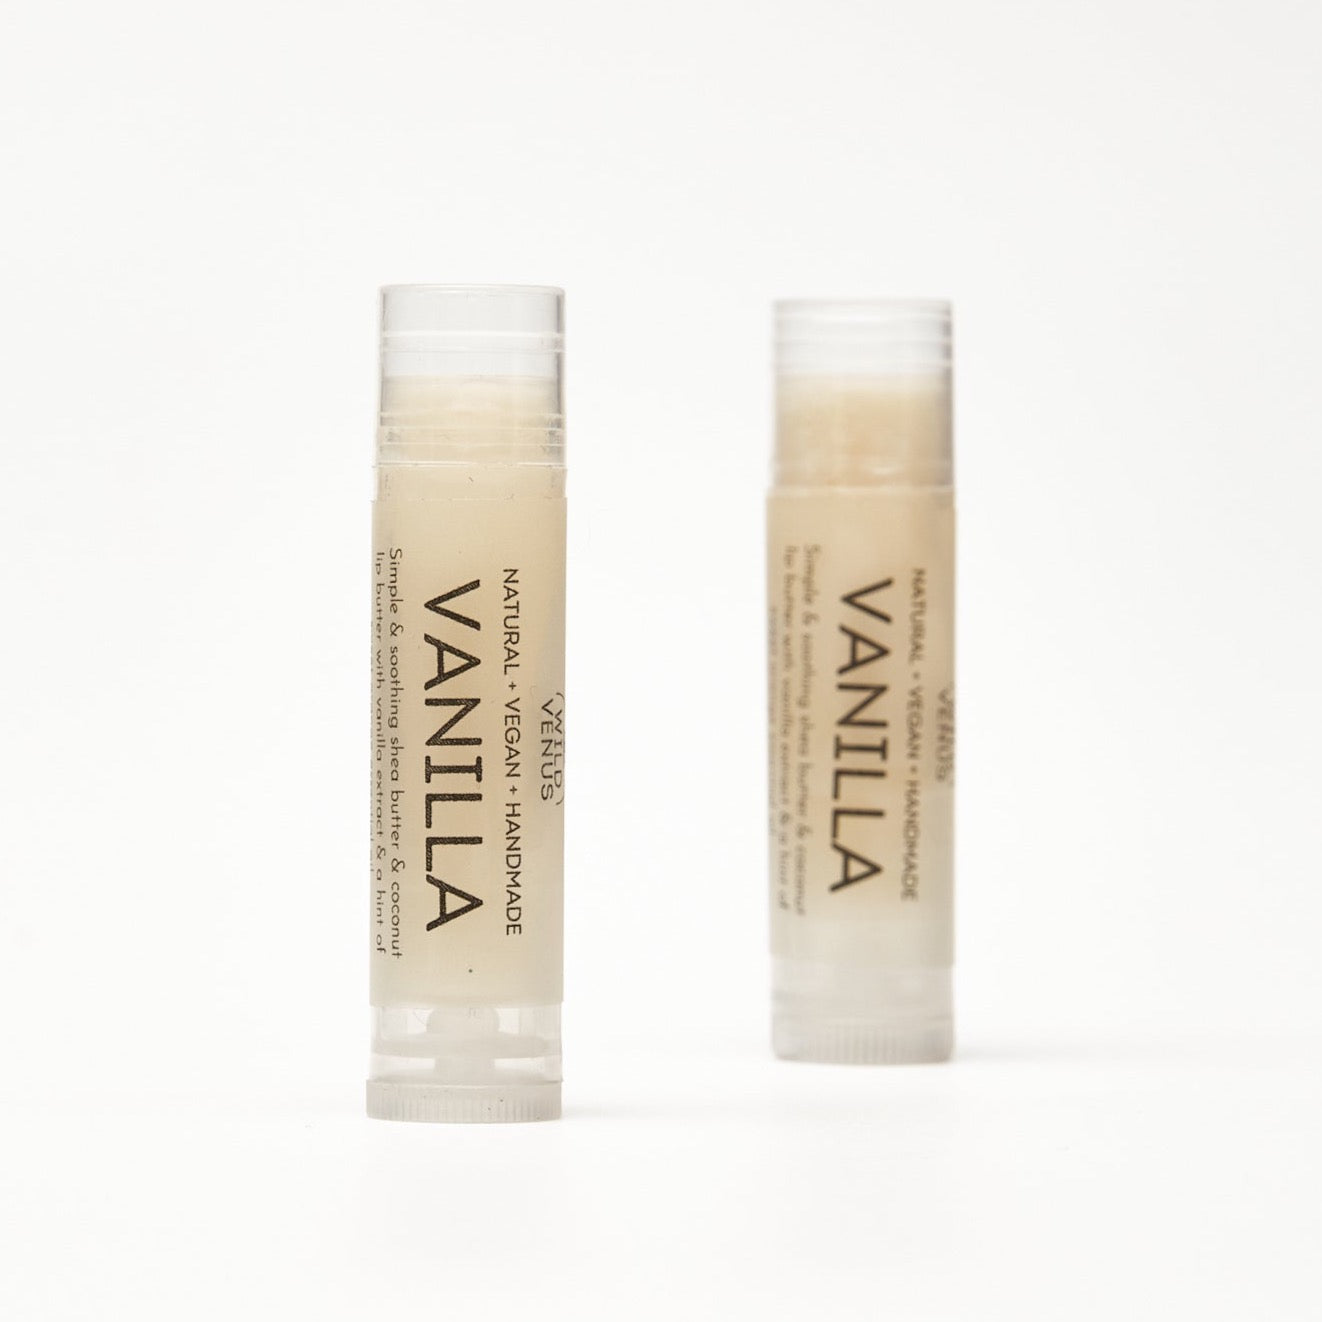 Two Vanilla Lip balms made with natural and vegan ingredients. 